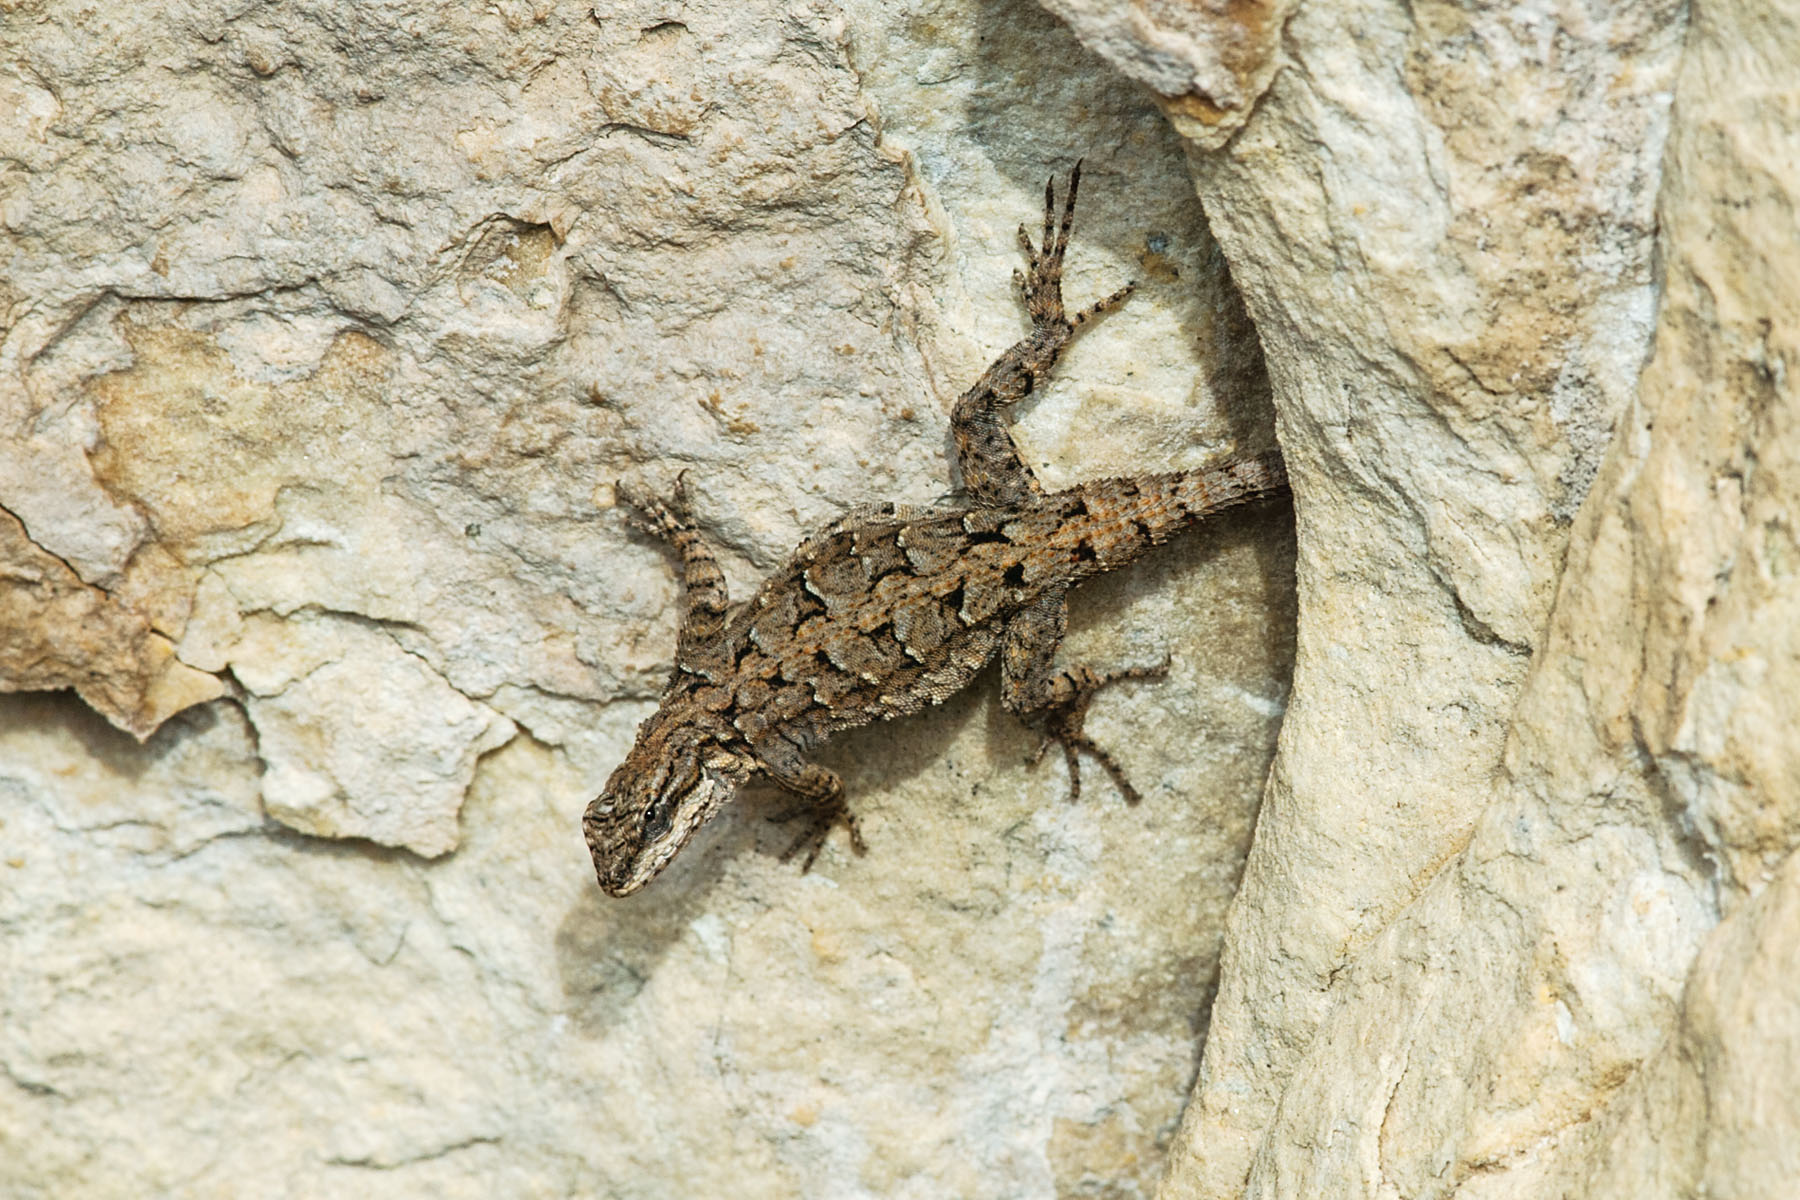 Lizard in Arizona.  It was tougher than I thought to shoot these little lizards against the rocks.  This is one that was close to being in focus.  Click for next photo.